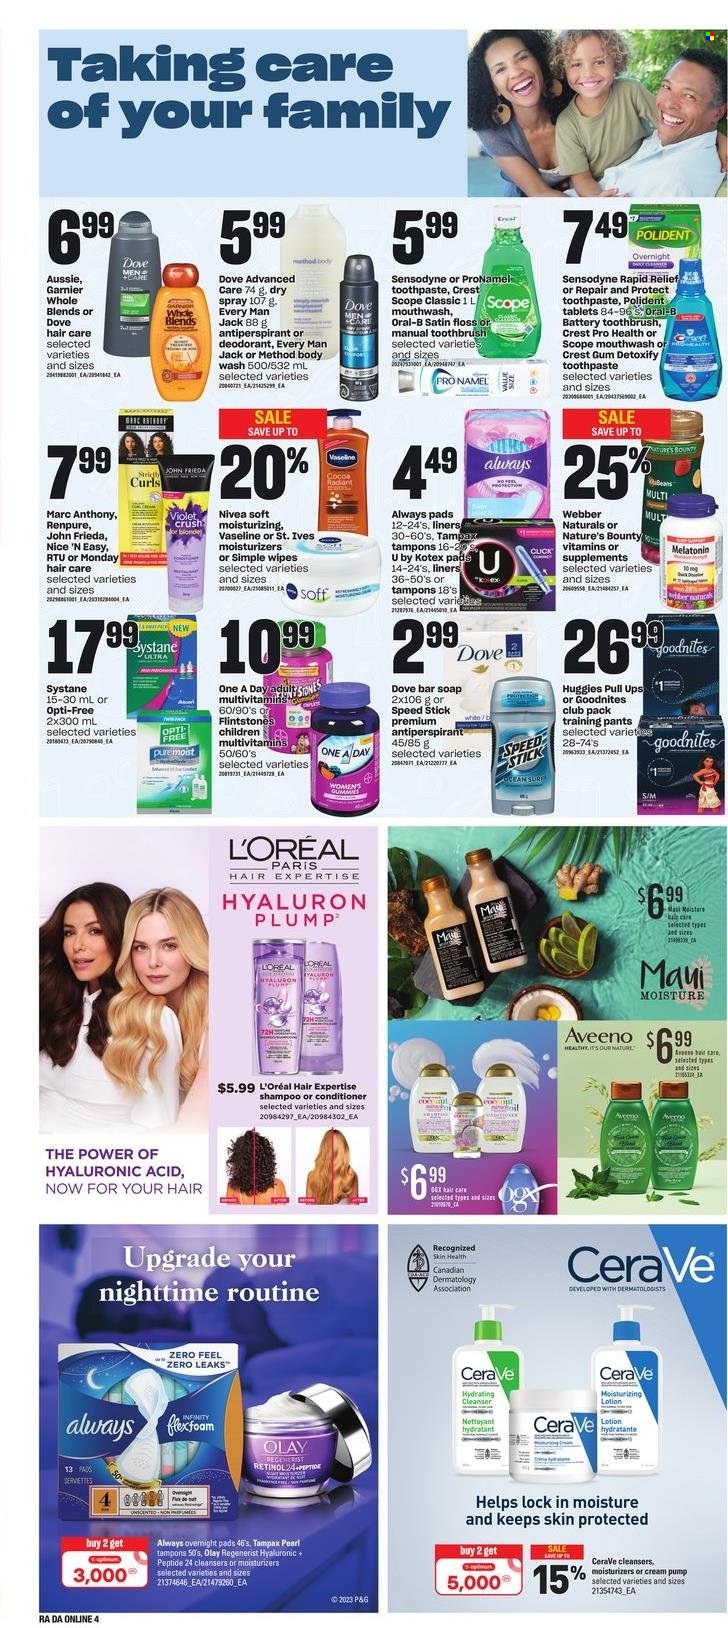 thumbnail - Dominion Flyer - March 16, 2023 - March 22, 2023 - Sales products - beans, Dove, wipes, pants, baby pants, Aveeno, Nivea, body wash, Vaseline, soap bar, soap, toothbrush, toothpaste, mouthwash, Polident, Crest, Always pads, sanitary pads, Kotex, Kotex pads, tampons, CeraVe, cleanser, L’Oréal, moisturizer, Olay, Aussie, conditioner, John Frieda, Maui Moisture, body lotion, anti-perspirant, Speed Stick, Sure, serviettes, Optimum, pump, Melatonin, multivitamin, Nature's Bounty, Garnier, shampoo, Systane, Tampax, Huggies, Oral-B, Sensodyne, deodorant. Page 7.